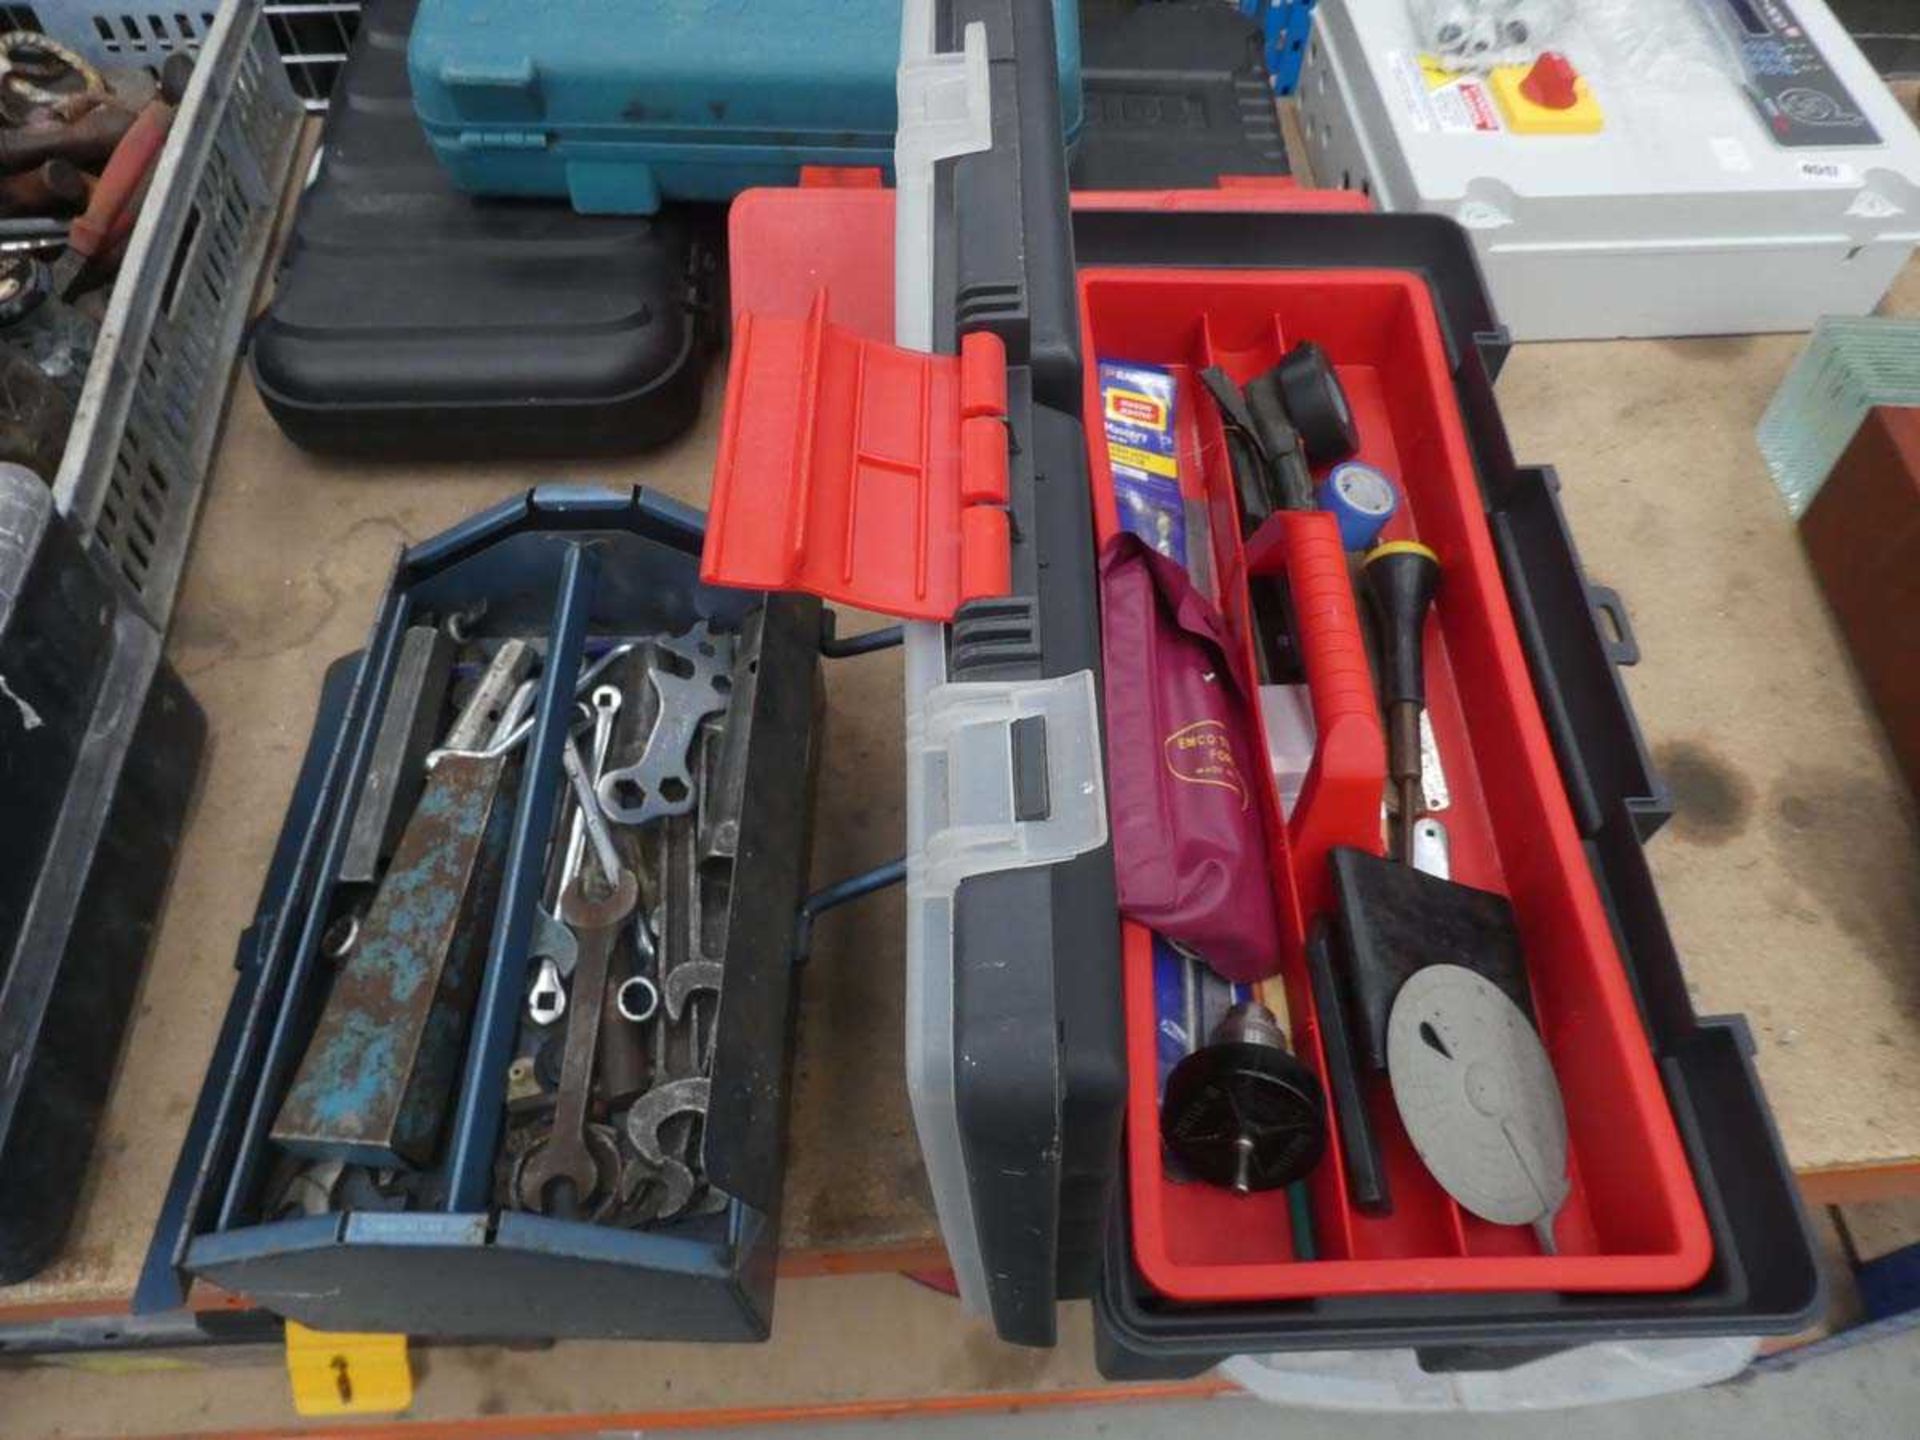 Blue cantilever toolbox containing spanners and a black plastic toolbox containing various